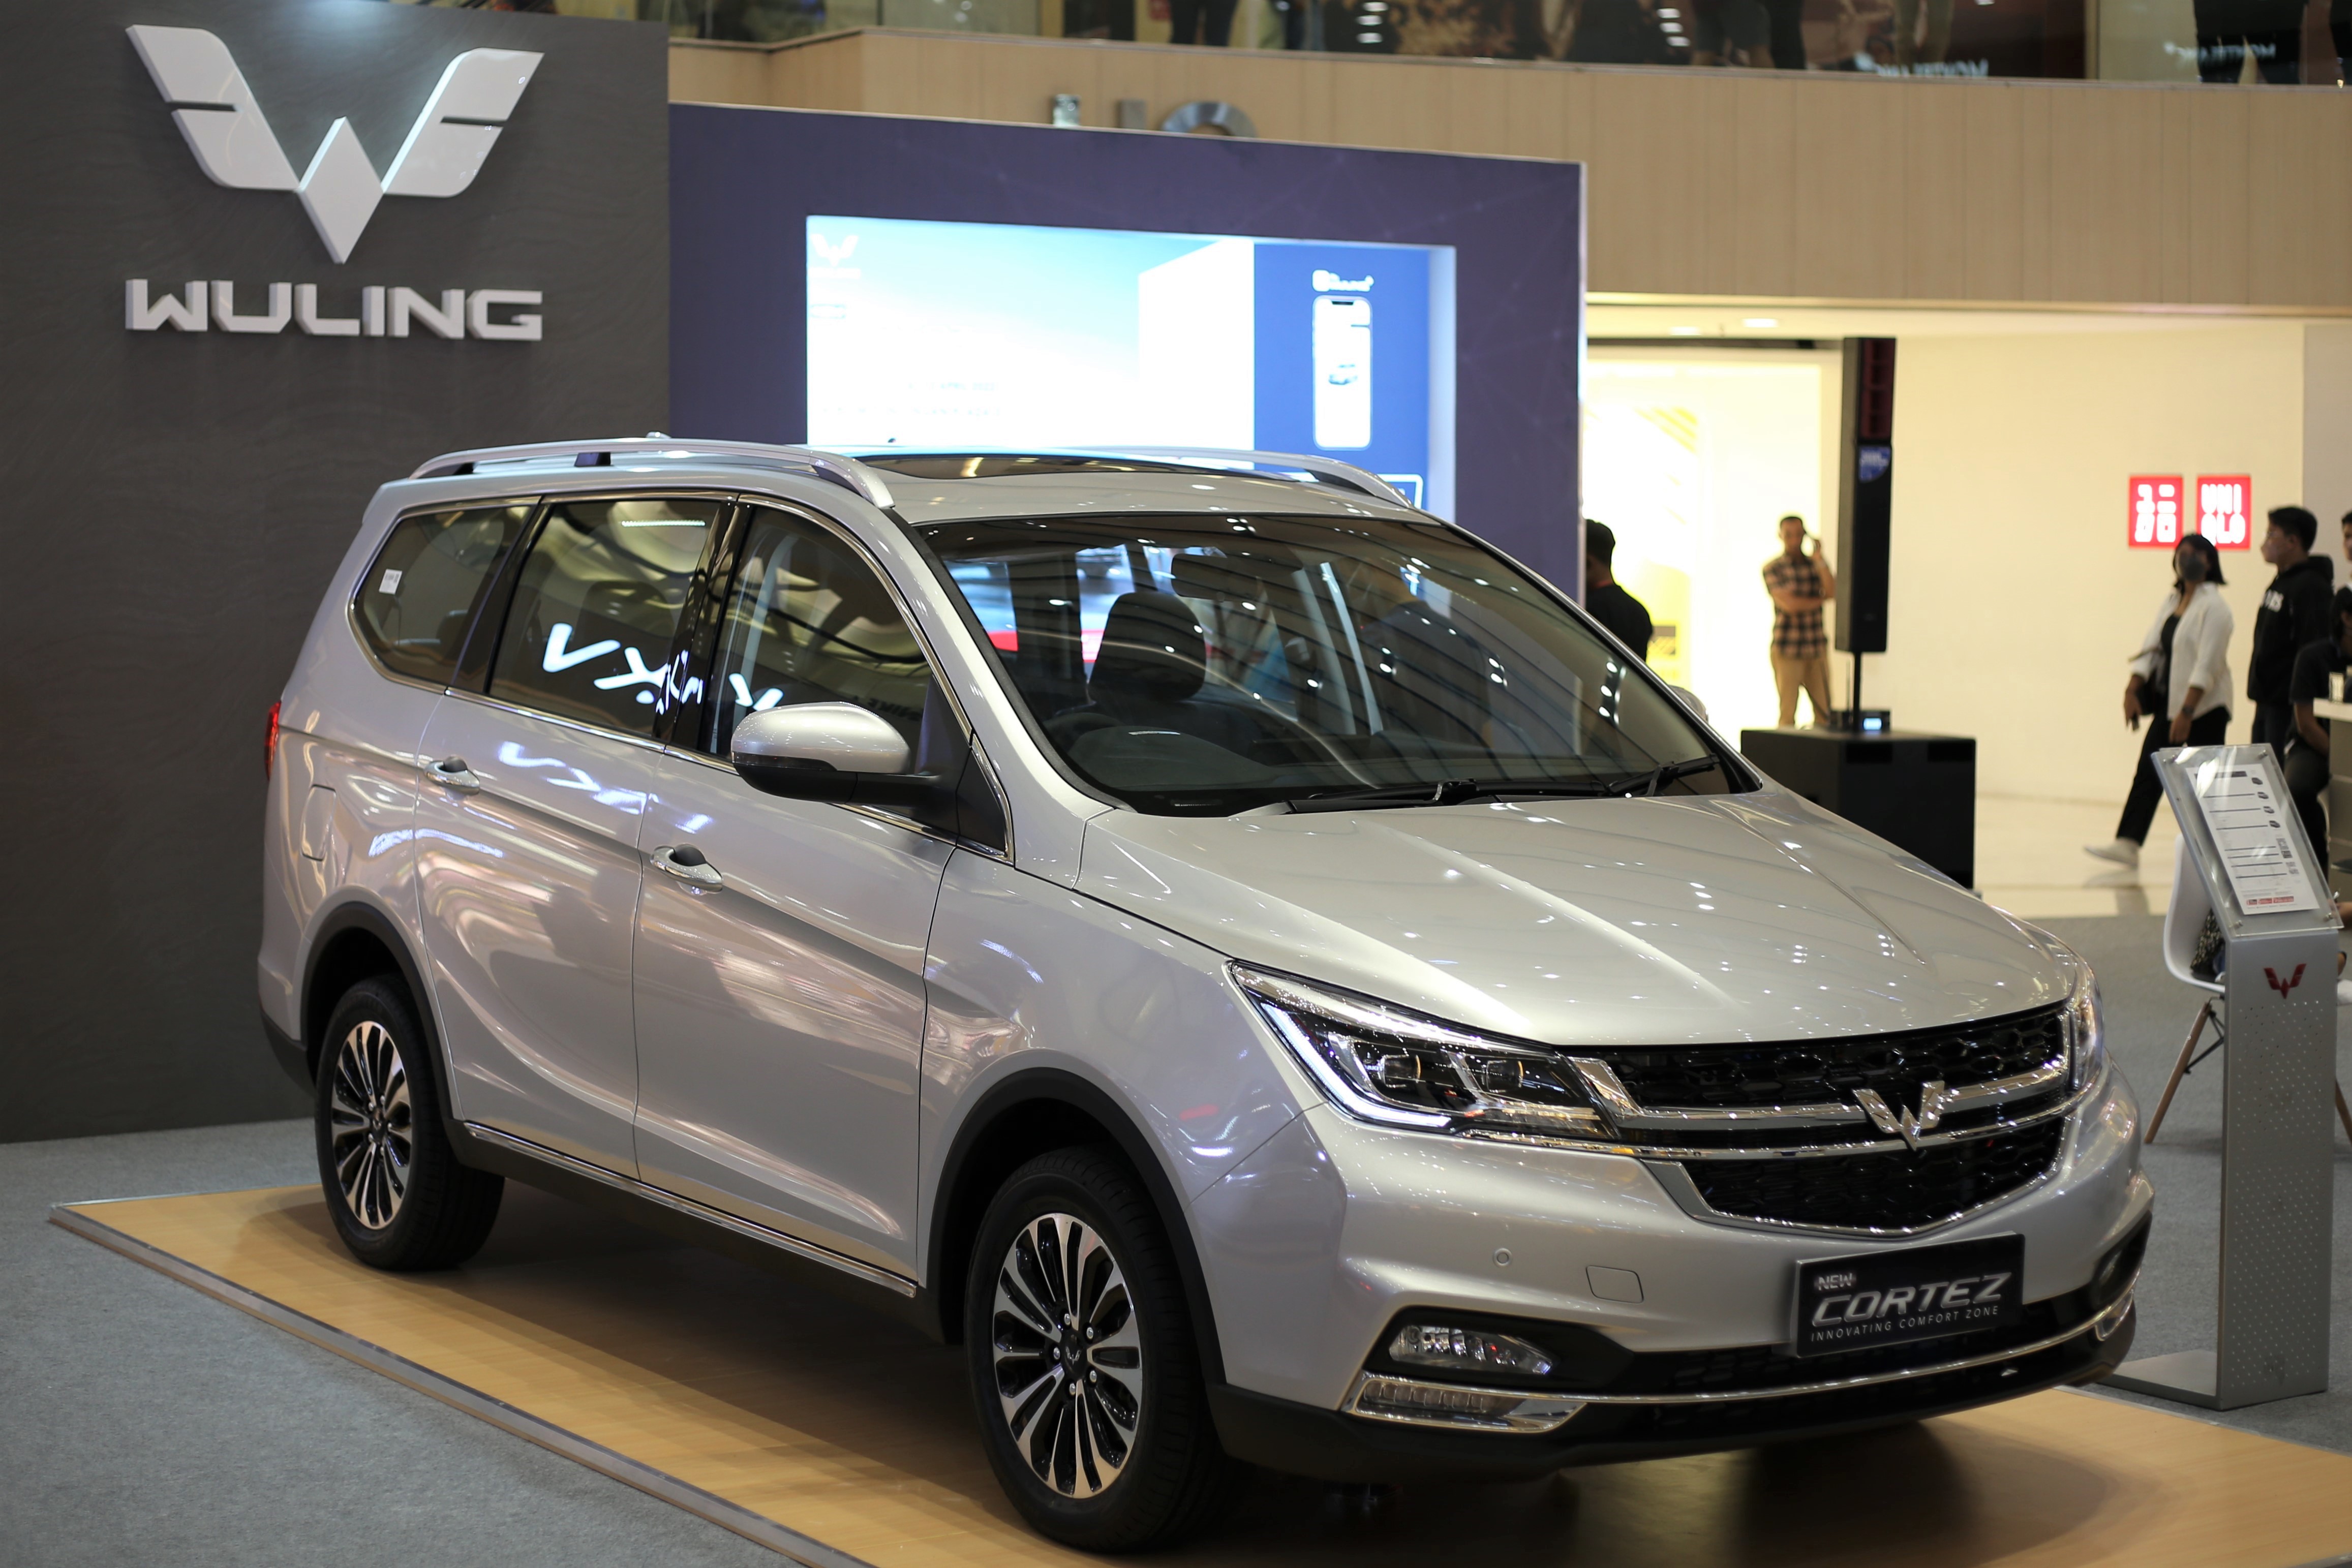 Image Wuling New Cortez,Innovating Comfort Zone Launches in Surabaya